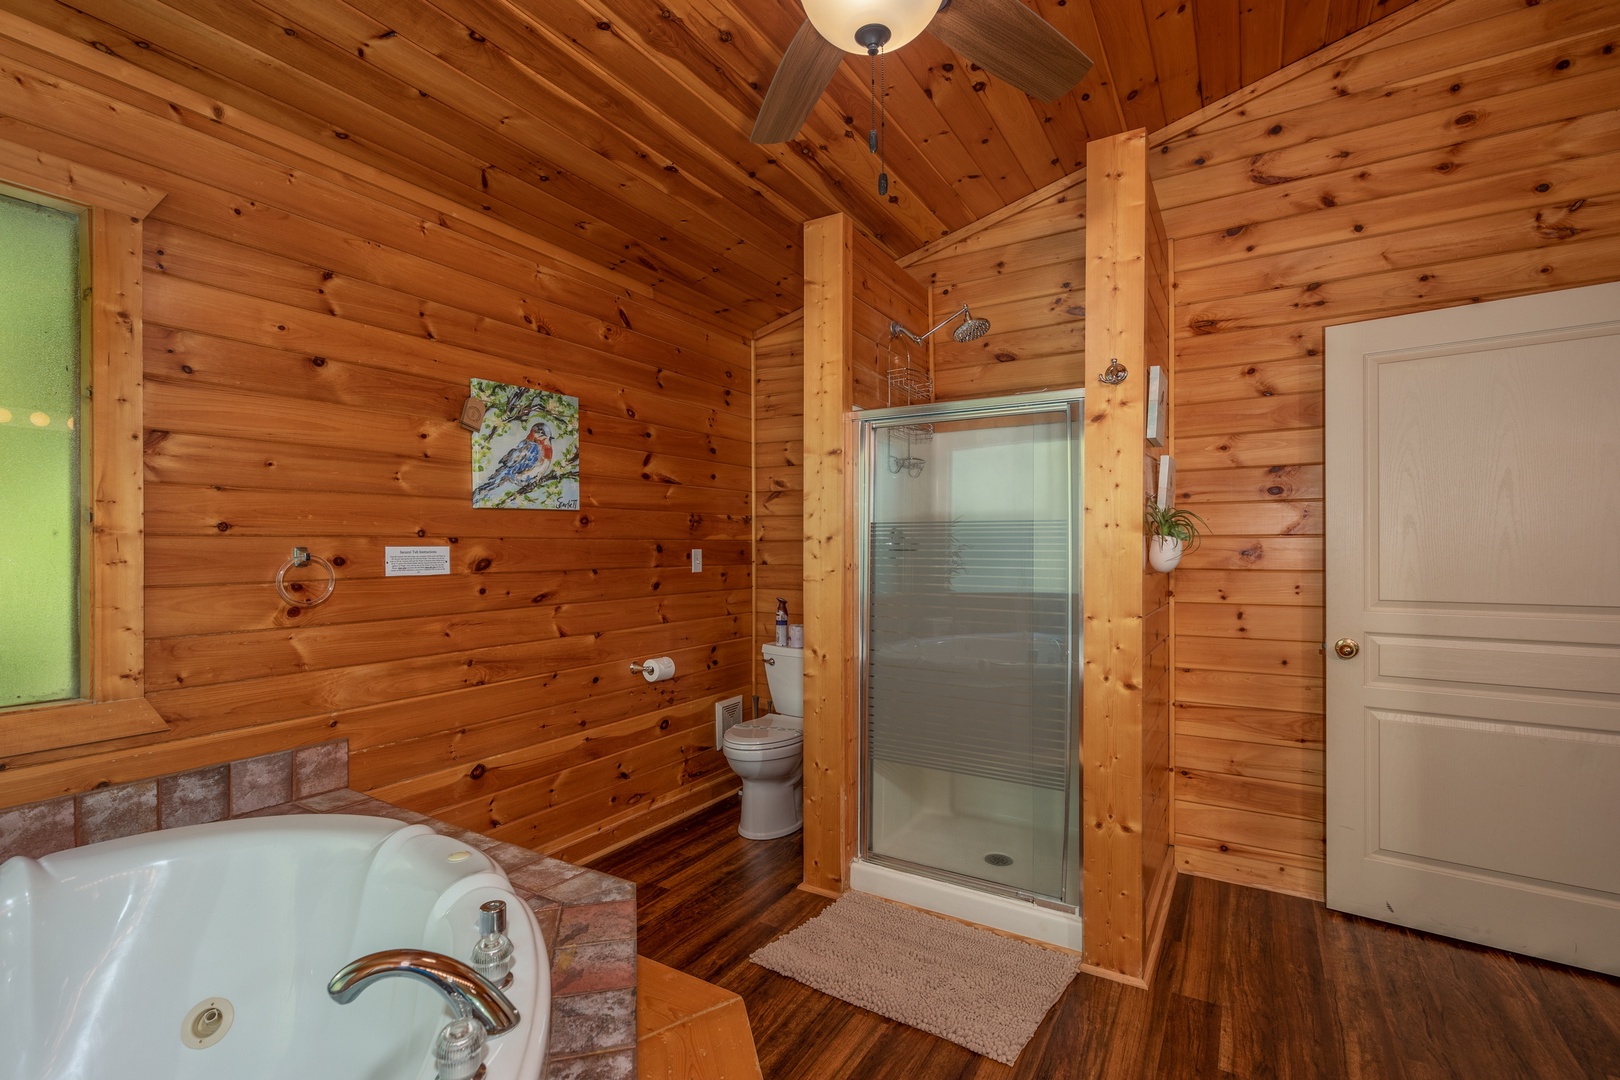 Bathroom with a jacuzzi tub and separate shower at Hawk's Heart Lodge, a 3 bedroom cabin rental located in Pigeon Forge